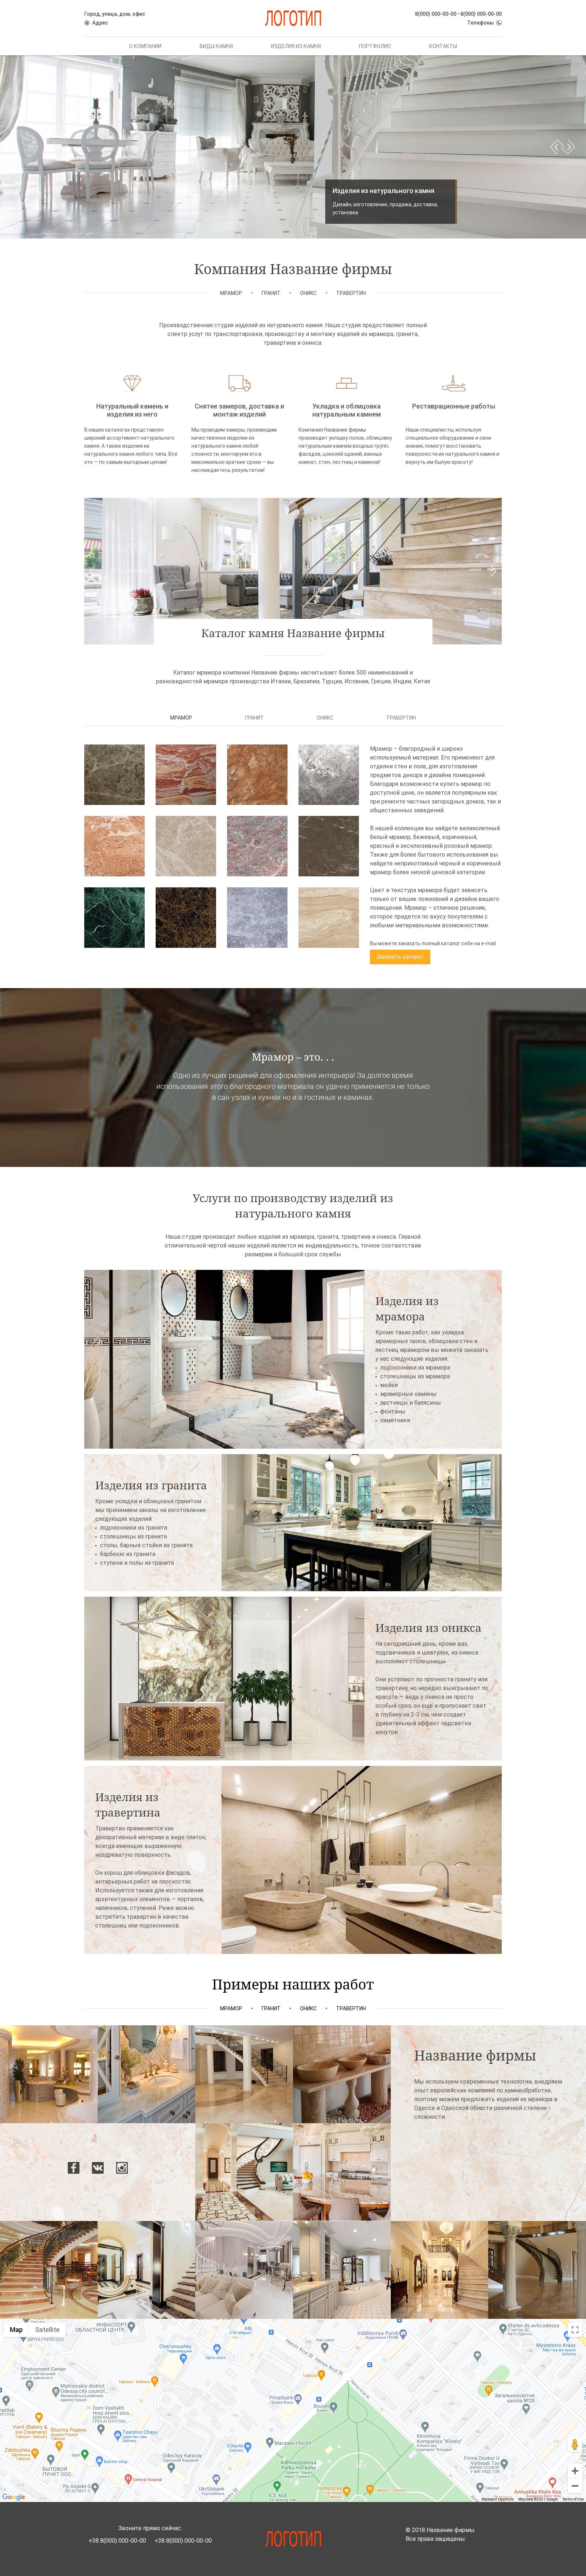 Landing page - Natural stone products studio